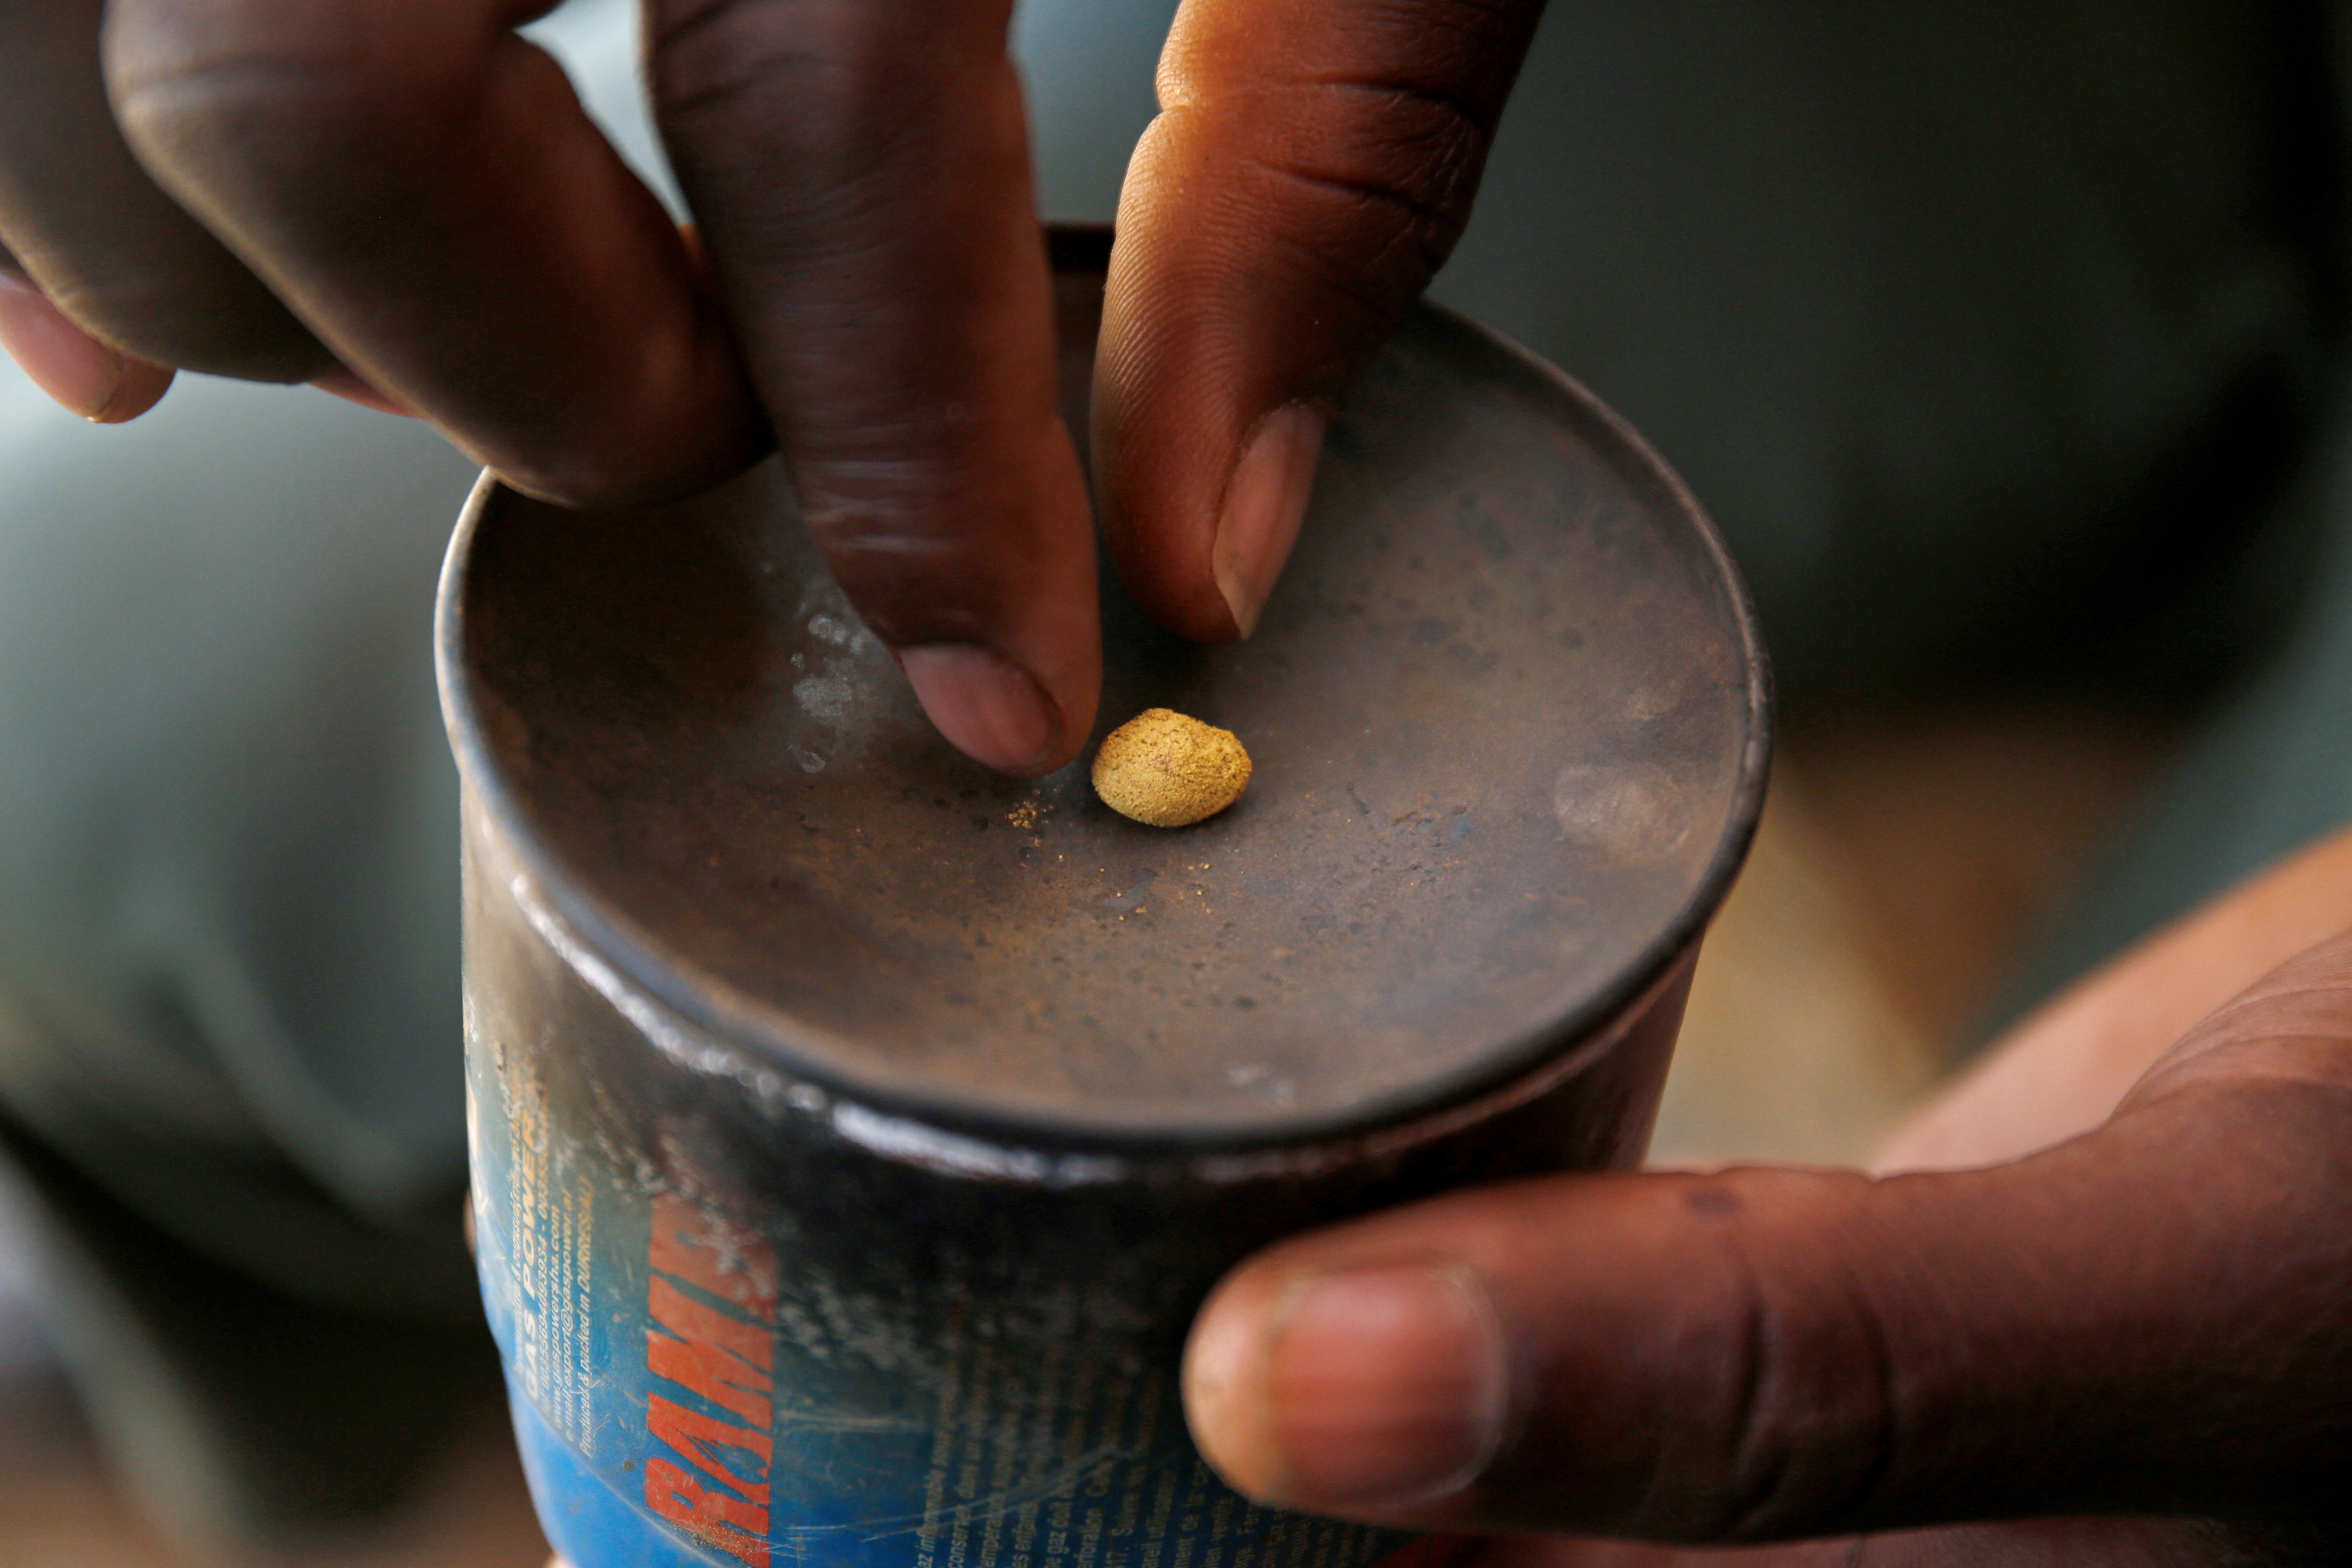 An artisanal gold miner picks up a gold nugget at an unlicensed mine in Gaoua, Burkina Faso